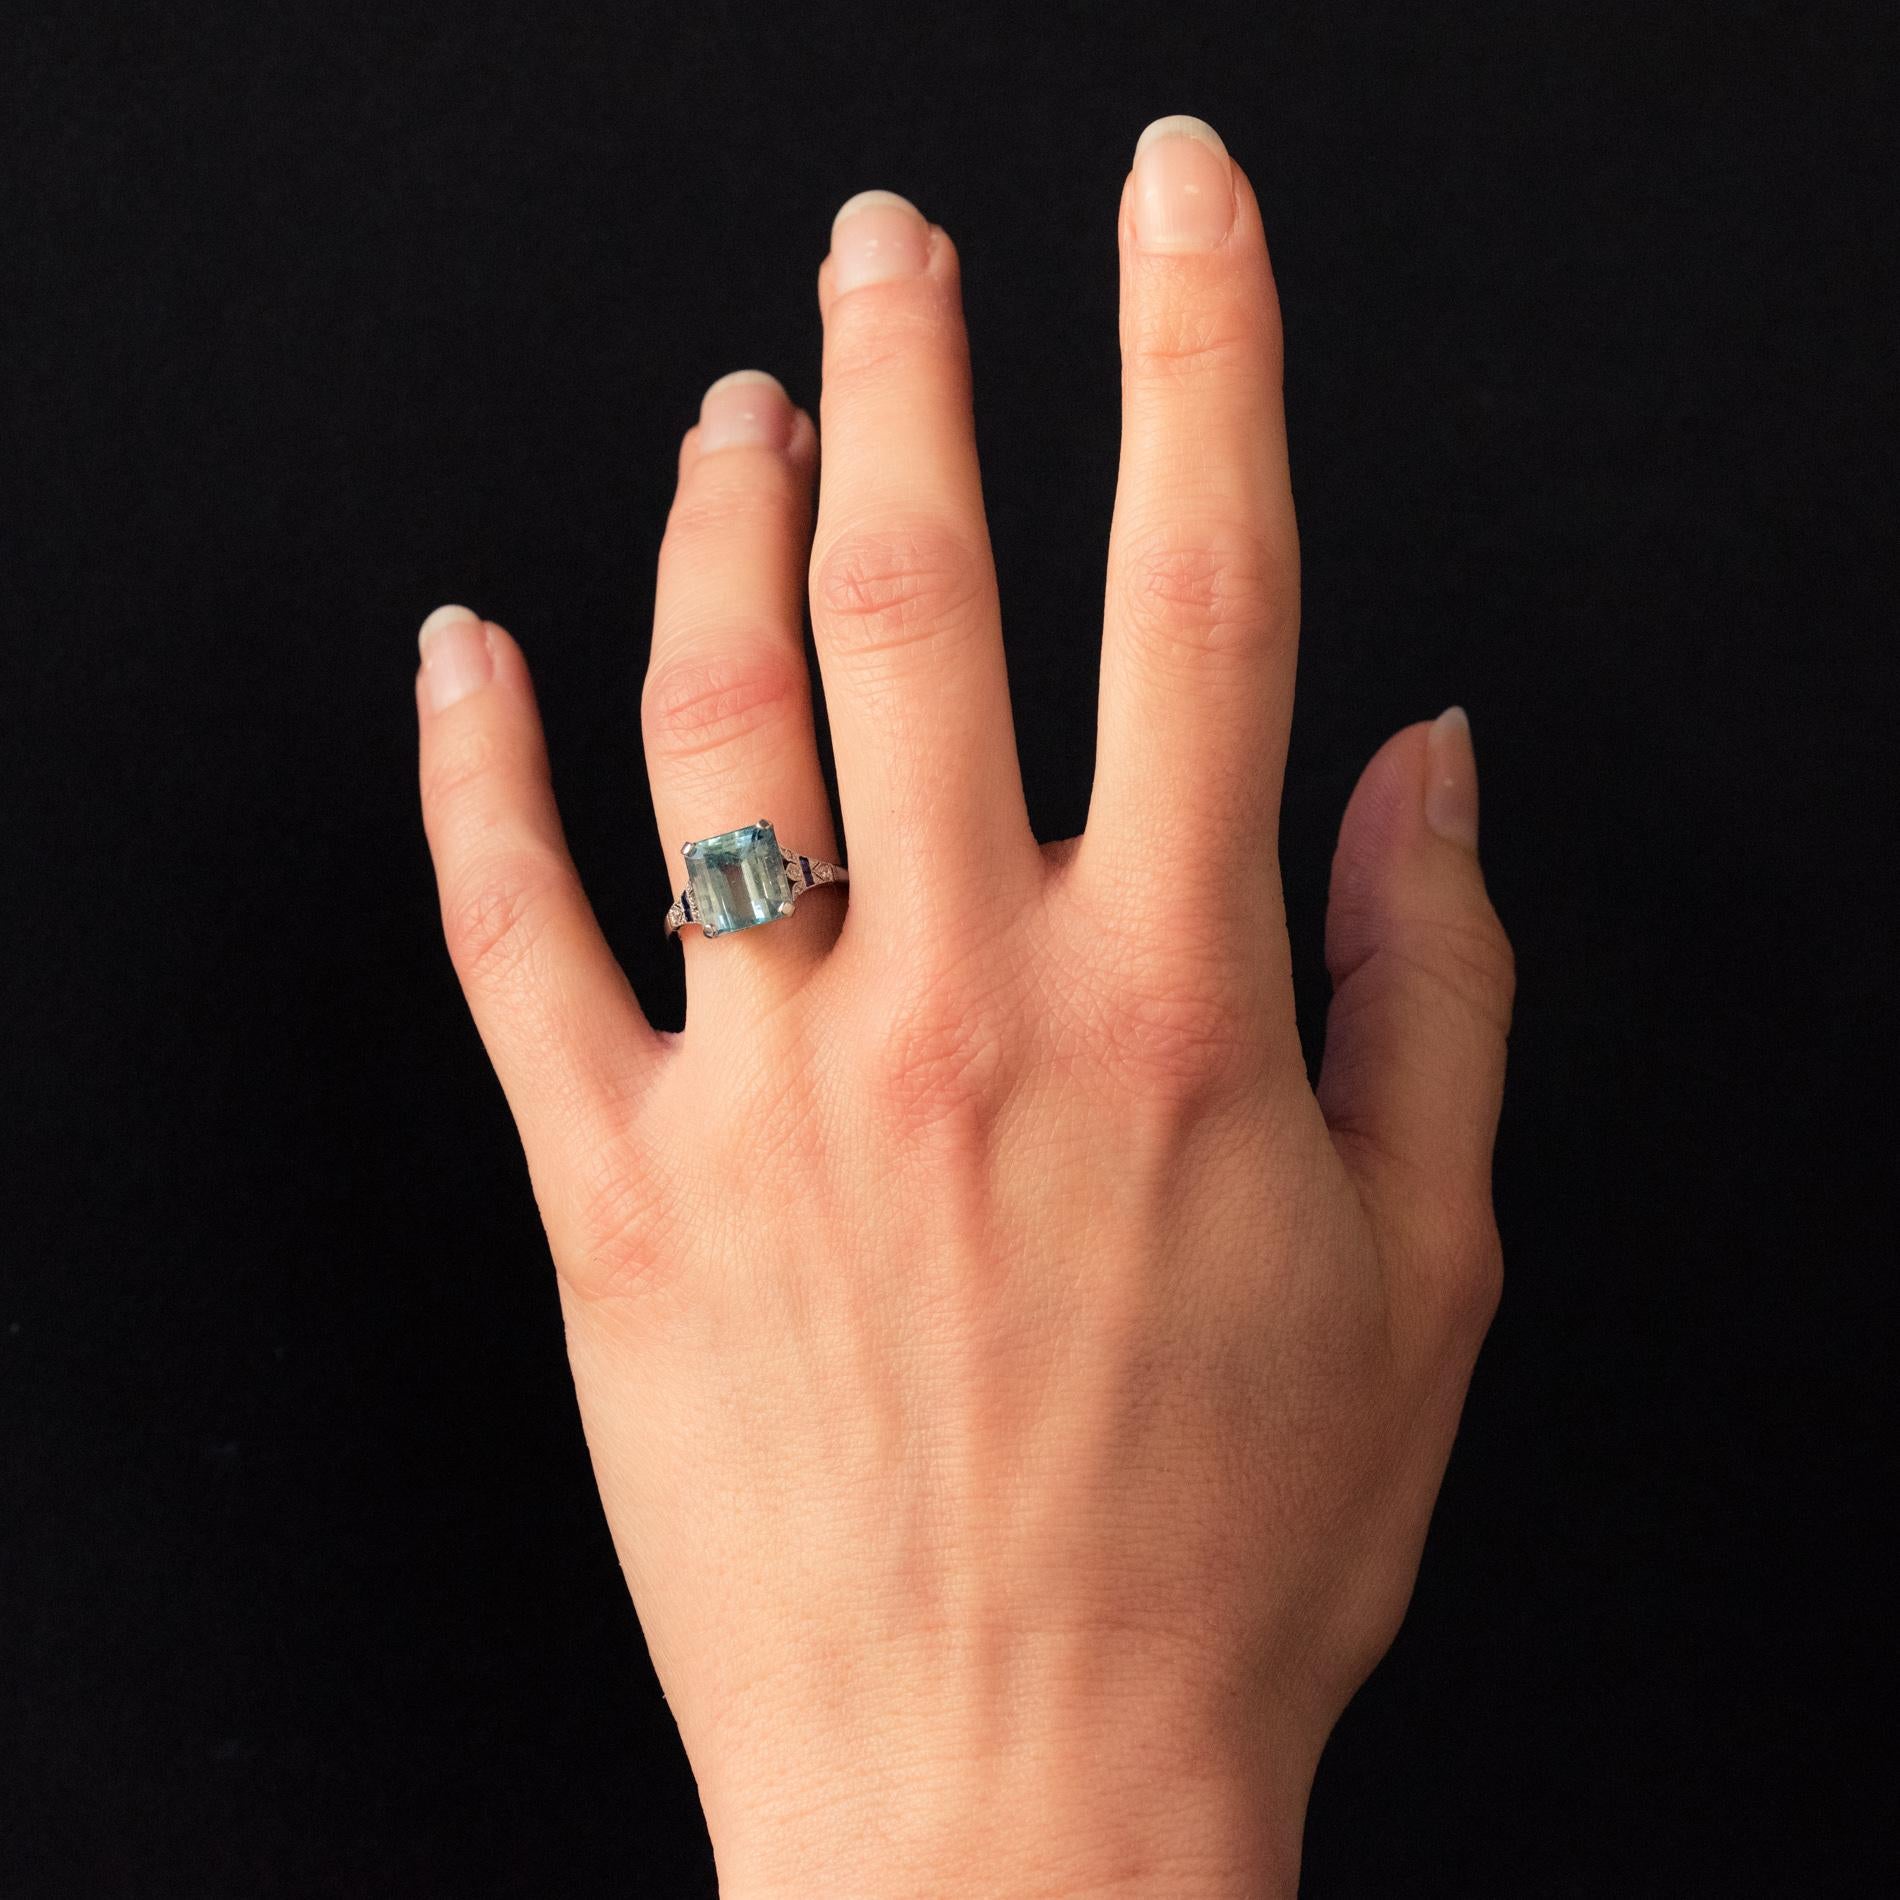 Ring in platinum.
Timeless antique ring, it is set on its top with 4 flat claws of a very beautiful emerald-cut aquamarine. On both sides the start of the ring is composed of a delicately openwork pattern and set with 2 x 4 diamonds and 2 x 2